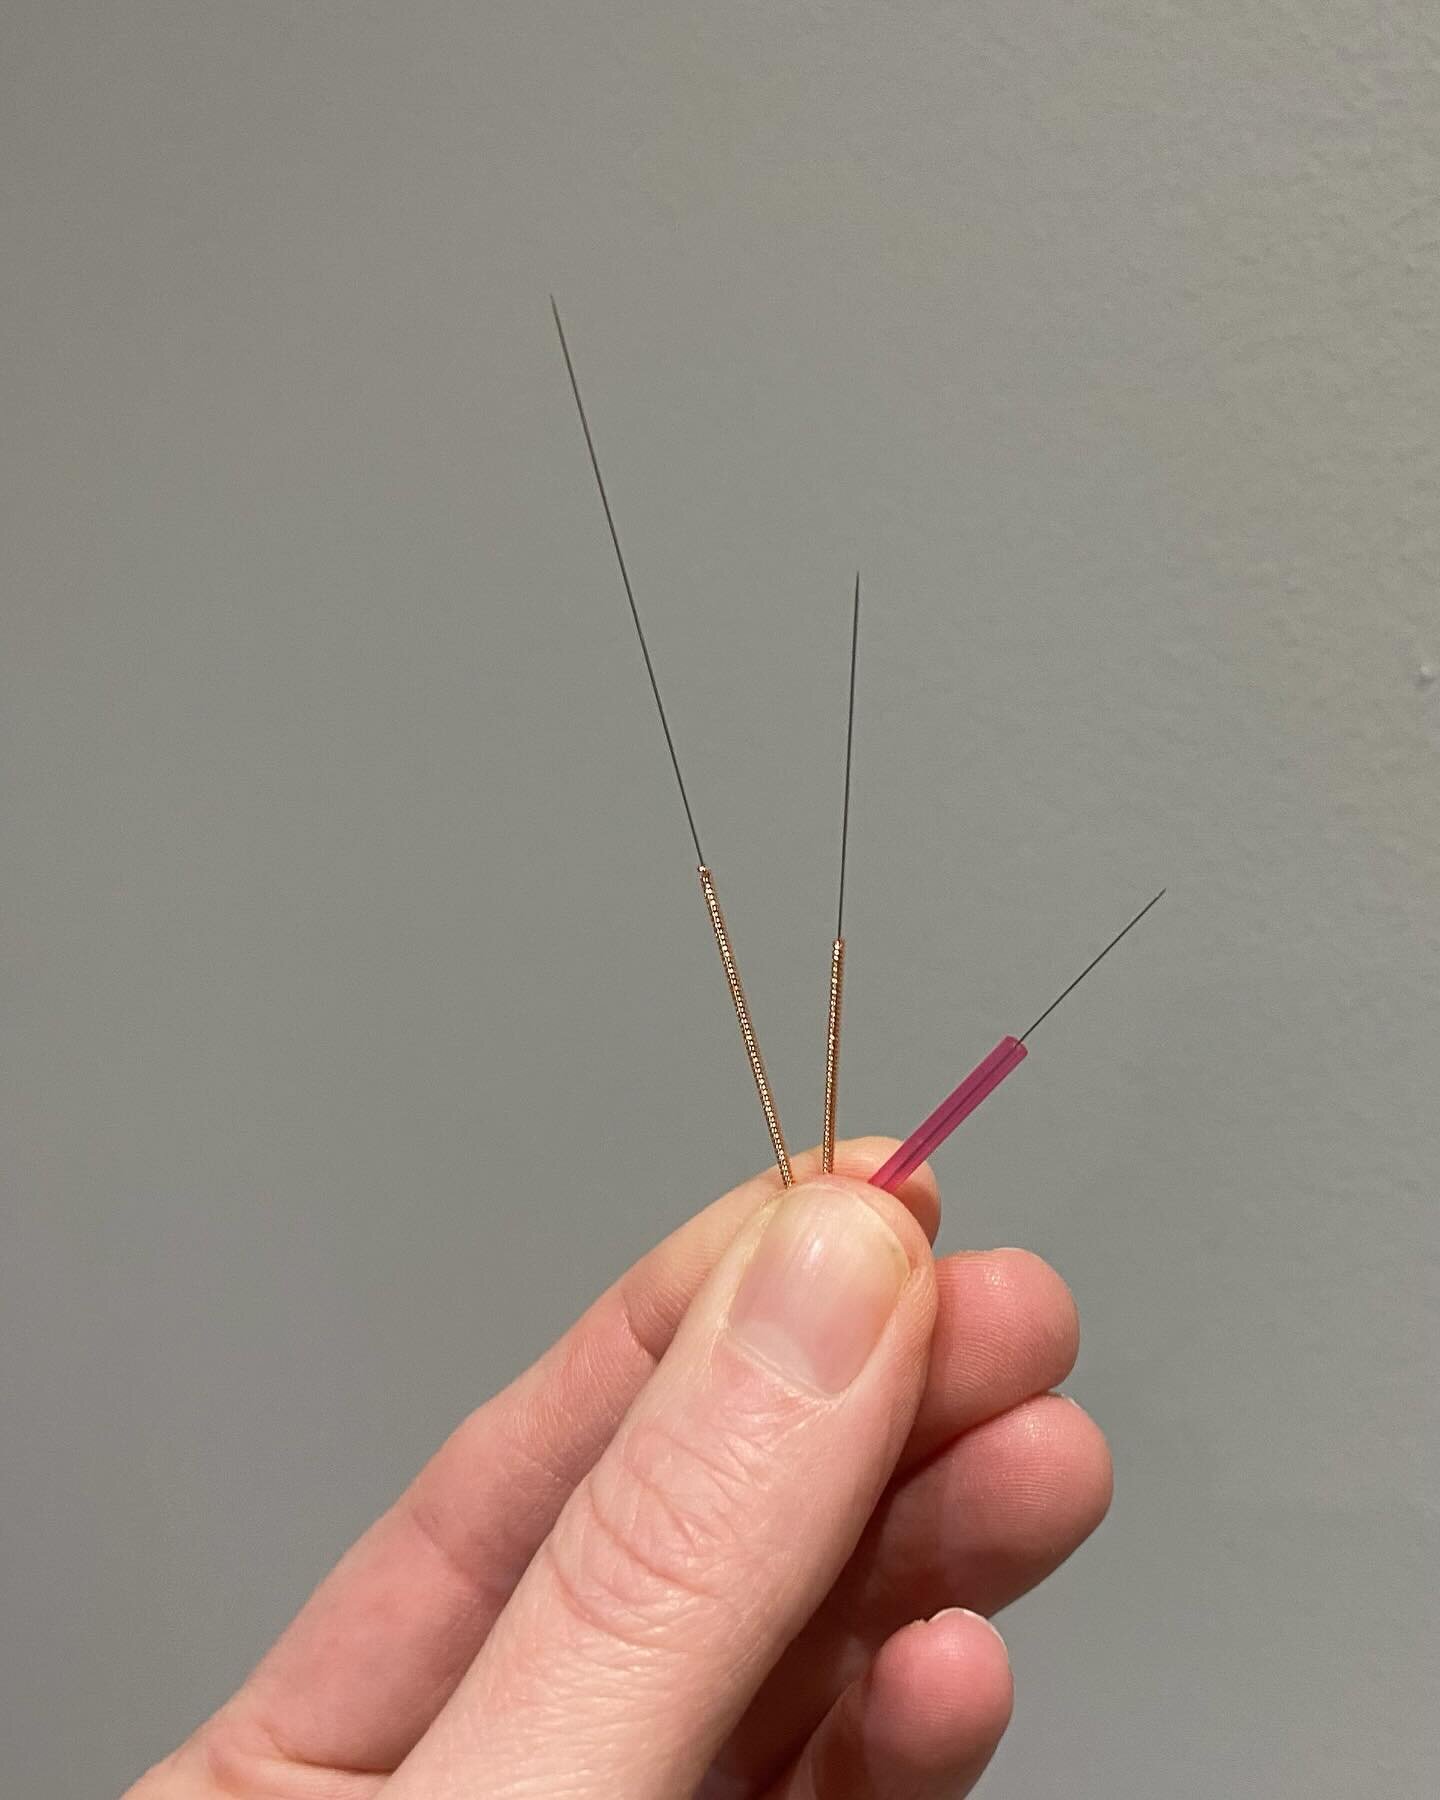 ☽ TINY NEEDLES☽

Let&rsquo;s talk about acupuncture needles&hellip;.

I often get asked &ldquo;How big are the needles?&rdquo;

Acupuncture needles are extremely fine, as fine as a hair! 
I use needles that are 0.20mm or 0.16mm wide&hellip;.so tiny! 